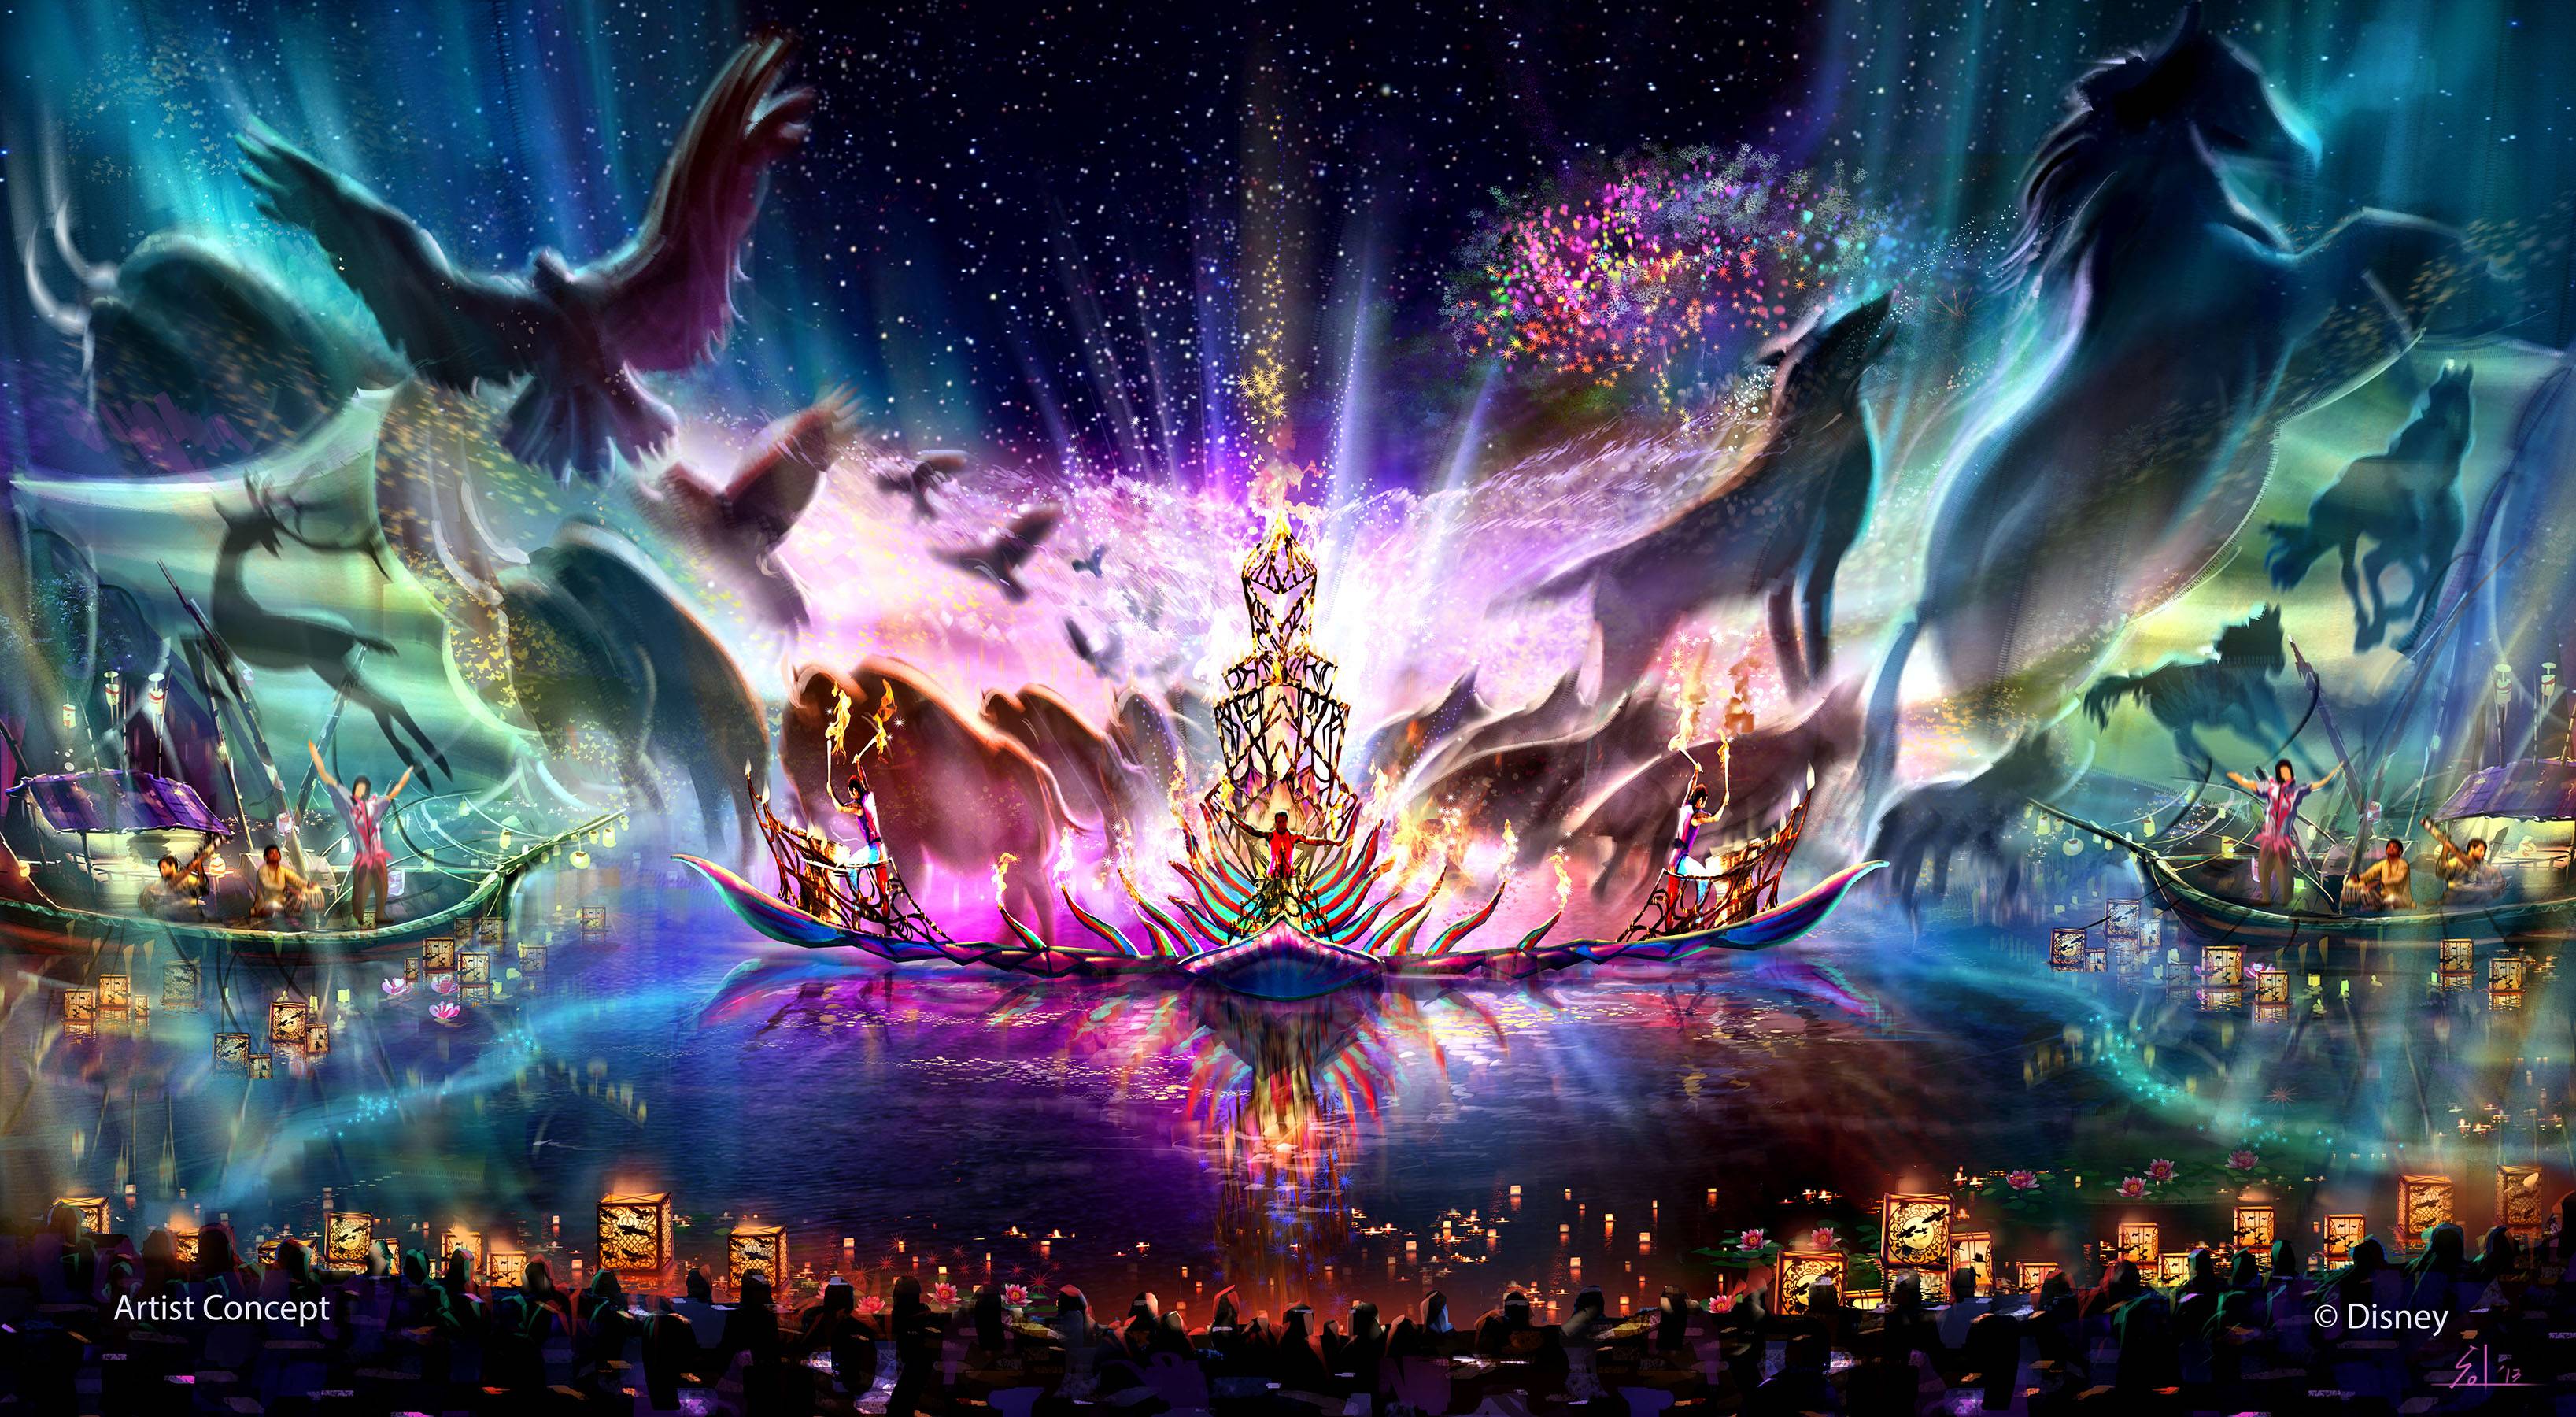 VIDEO - Disney posts Rivers of Light chat with creative team